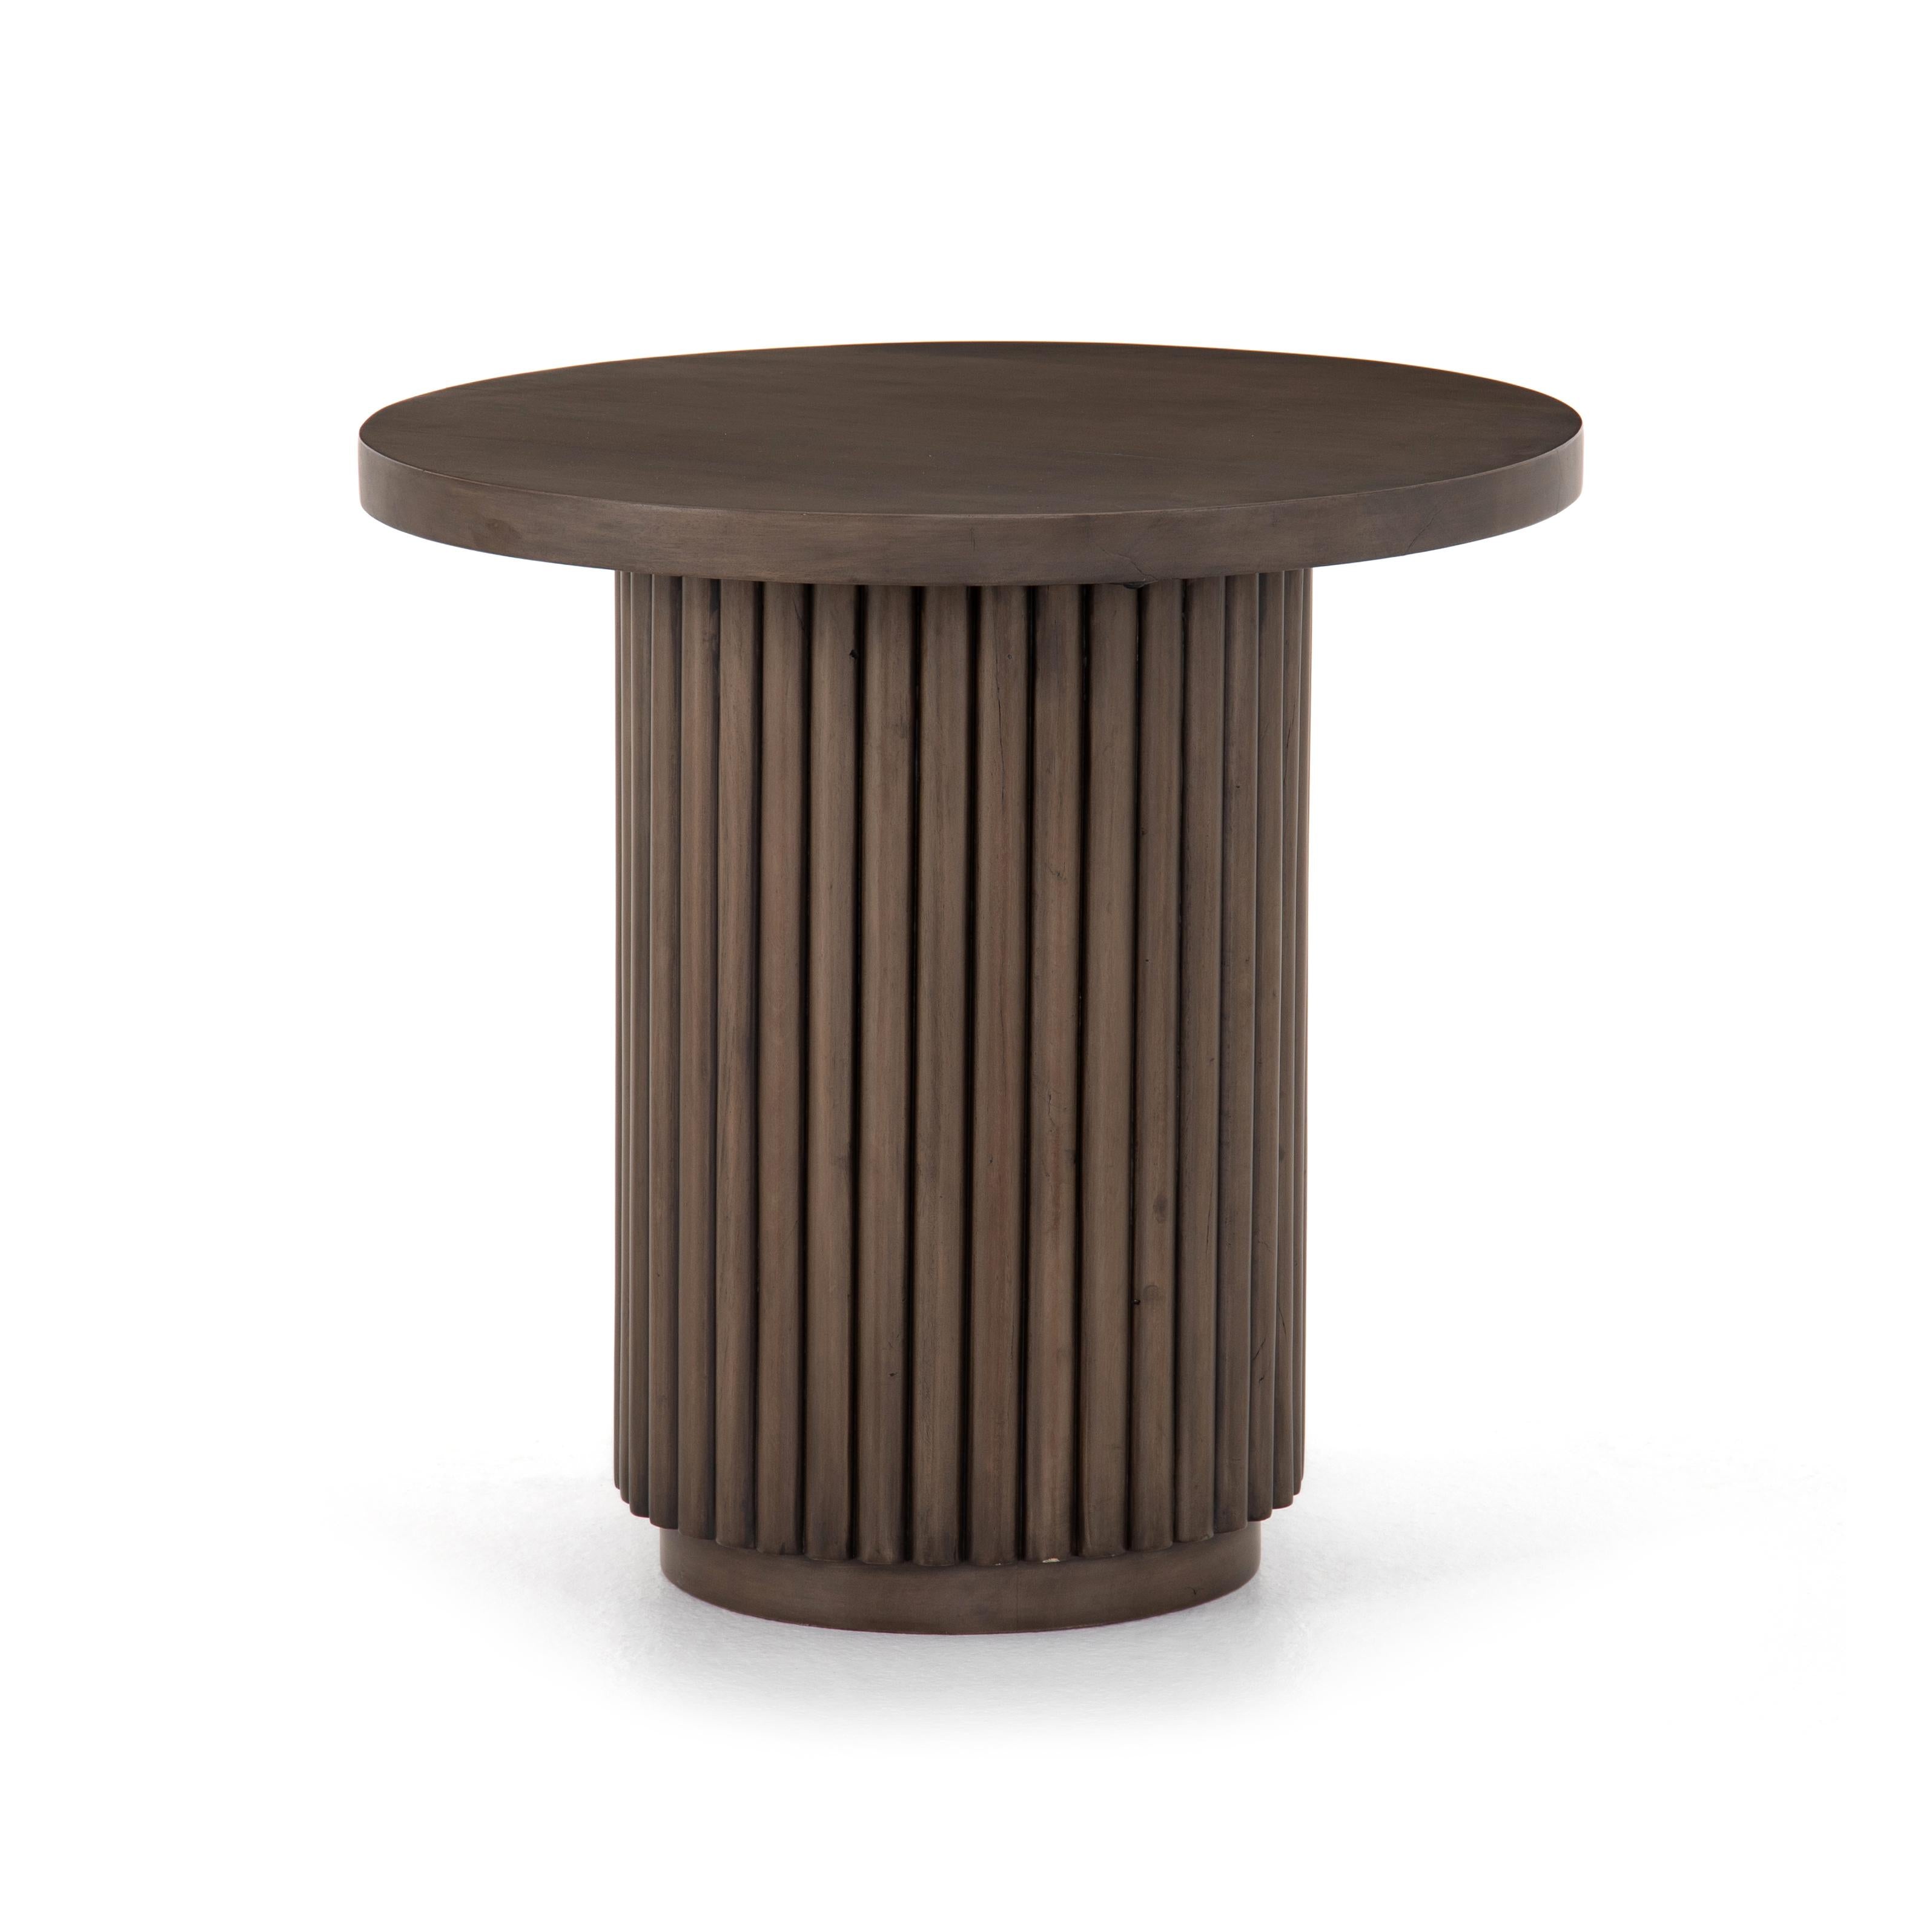 Paulo End Table $499.00